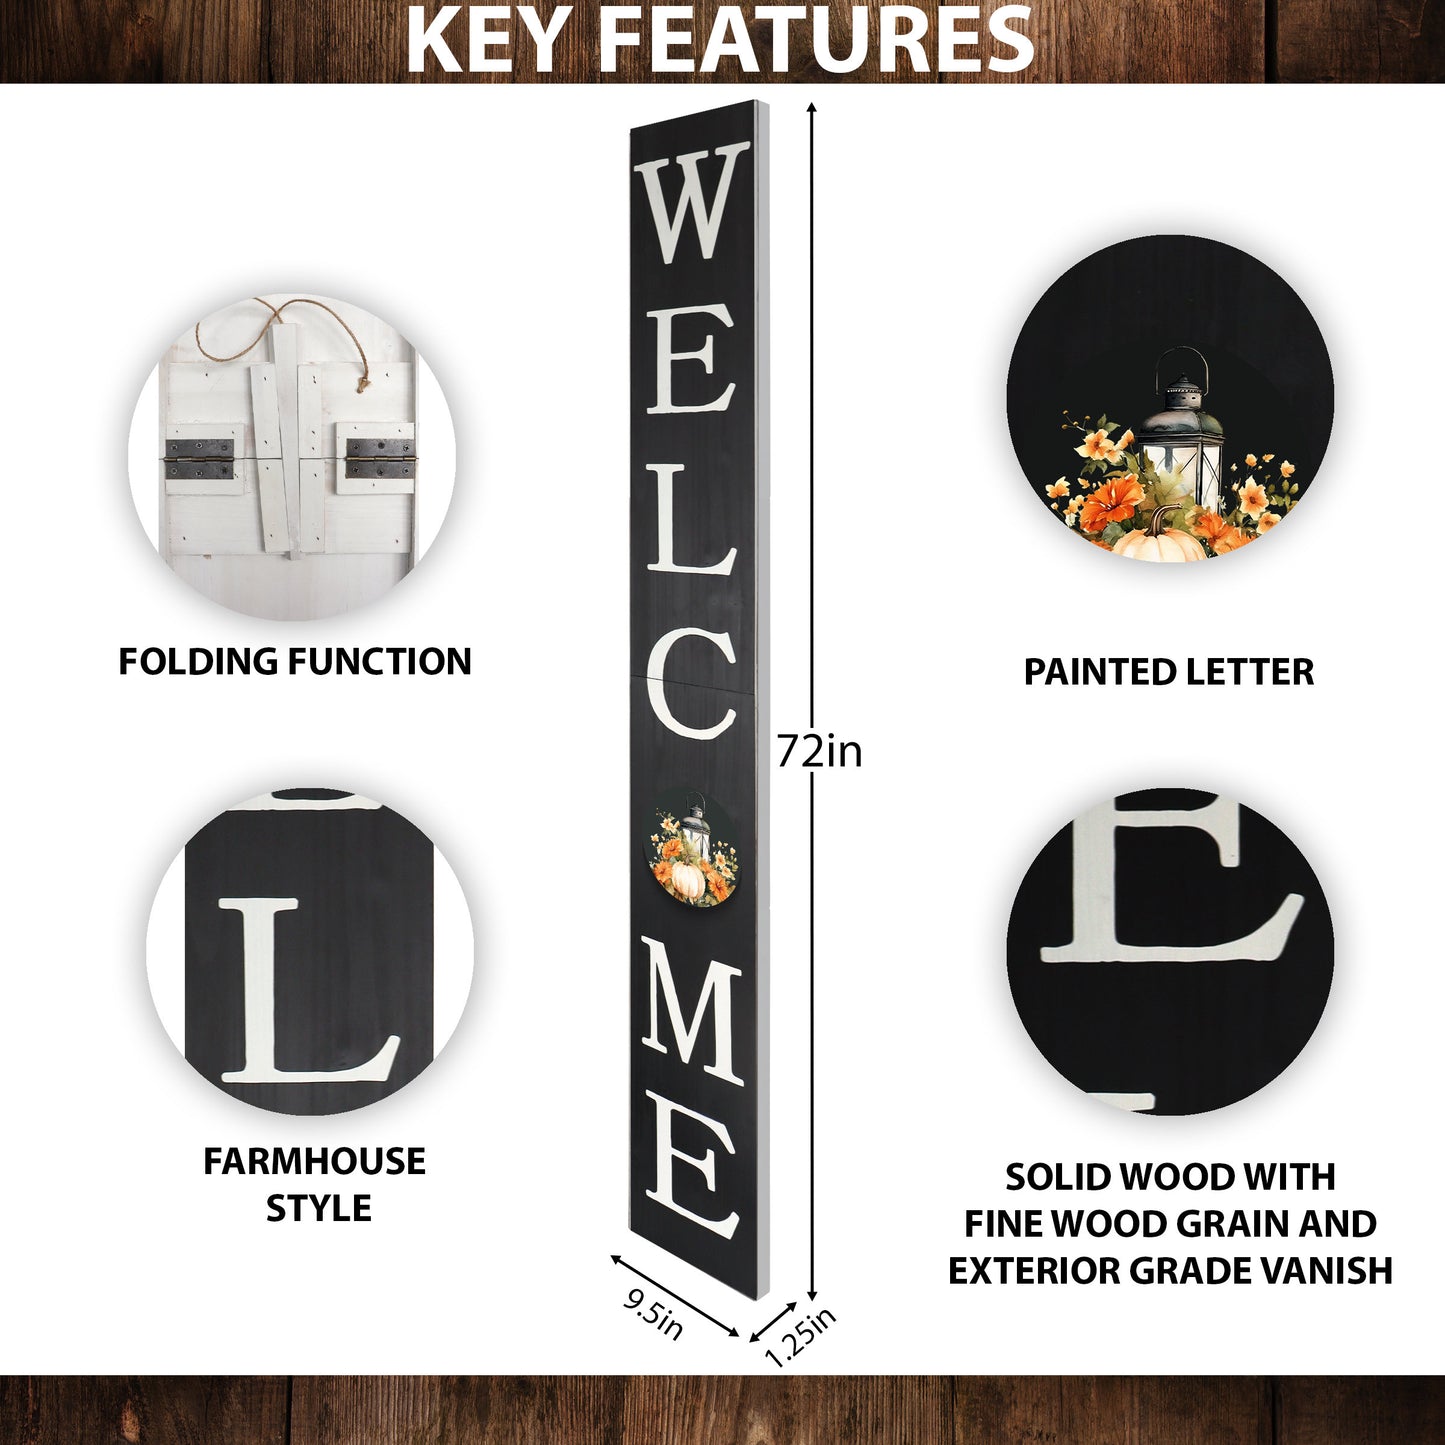 72in "Welcome" Fall Porch Sign with Lantern Design - Black Porch Board Decor for Front Door during Autumn and Thanksgiving Celebrations